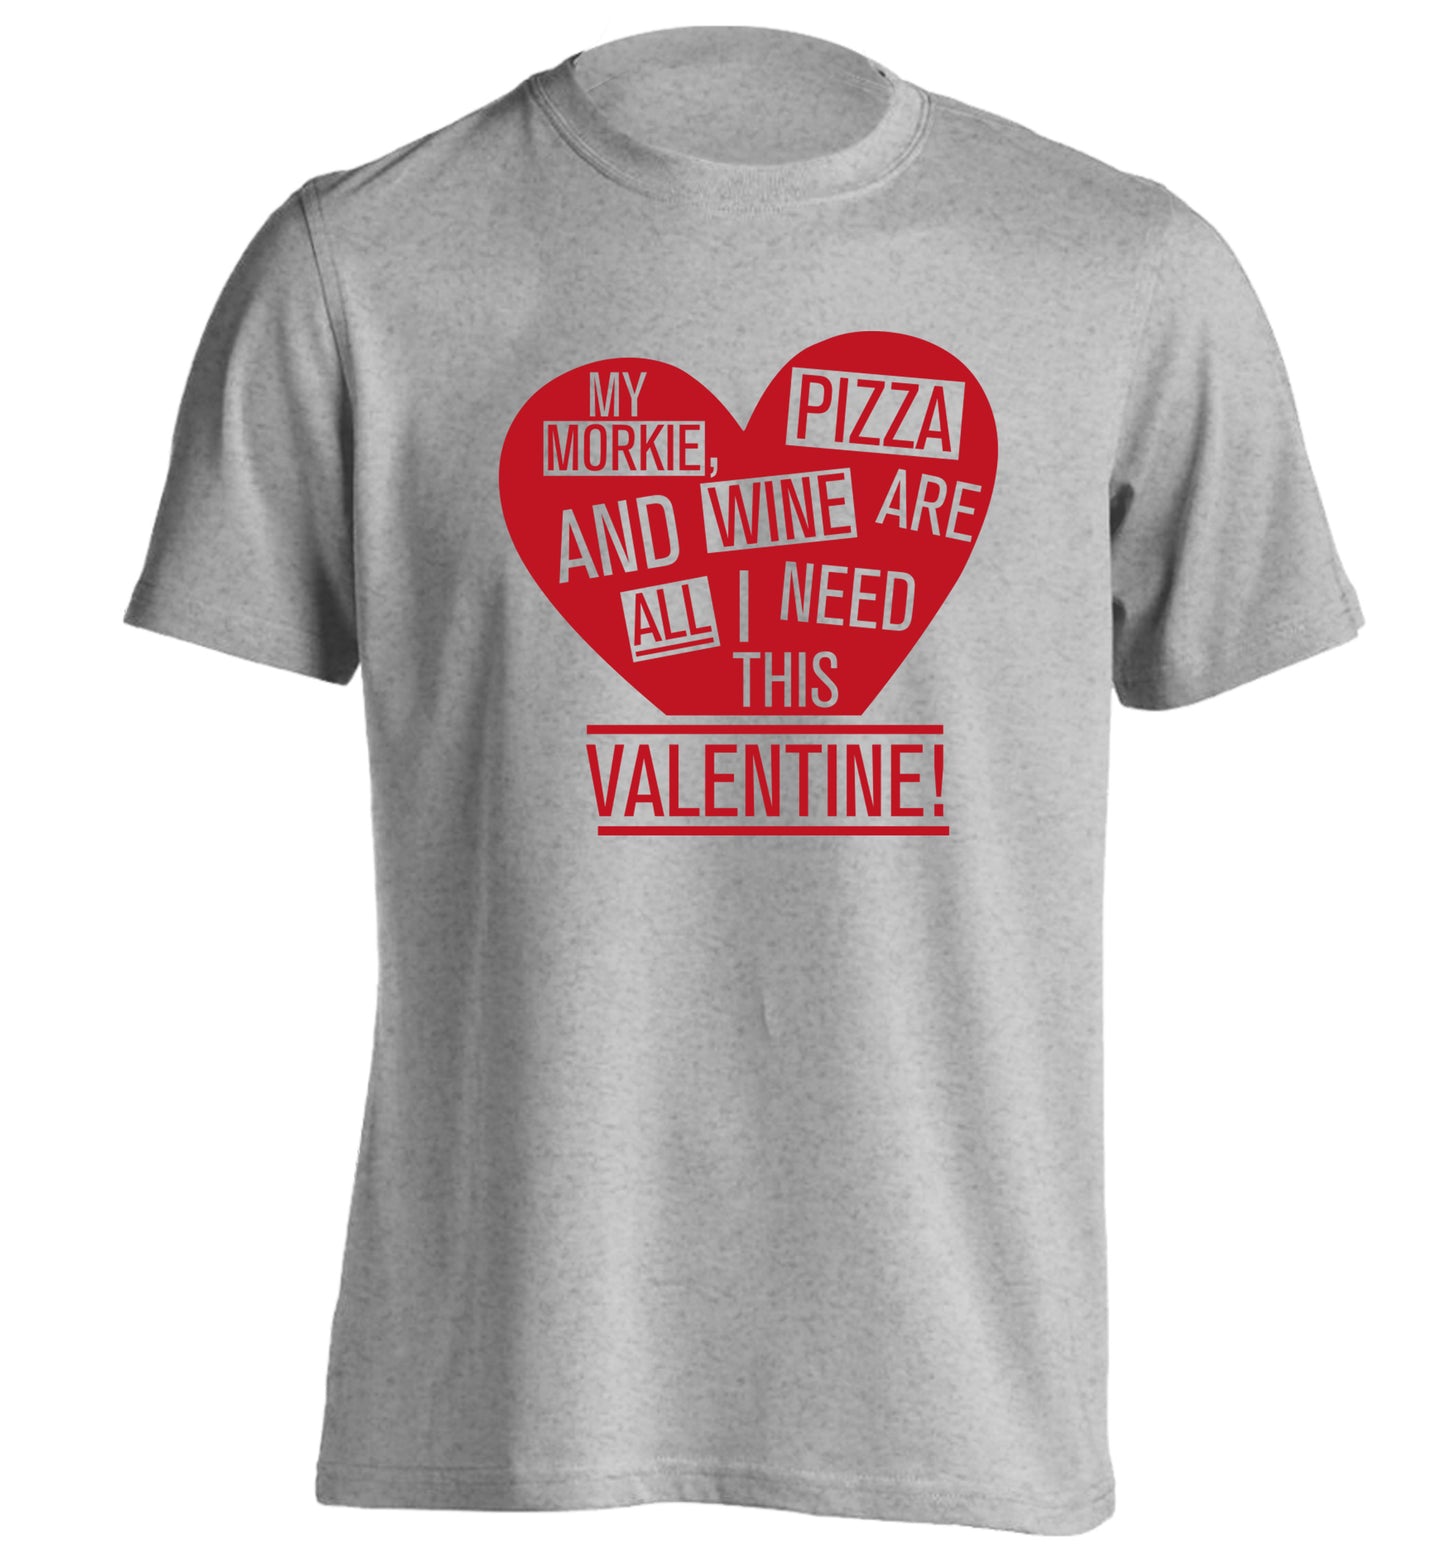 My morkie, pizza and wine are all I need this valentine! adults unisex grey Tshirt 2XL